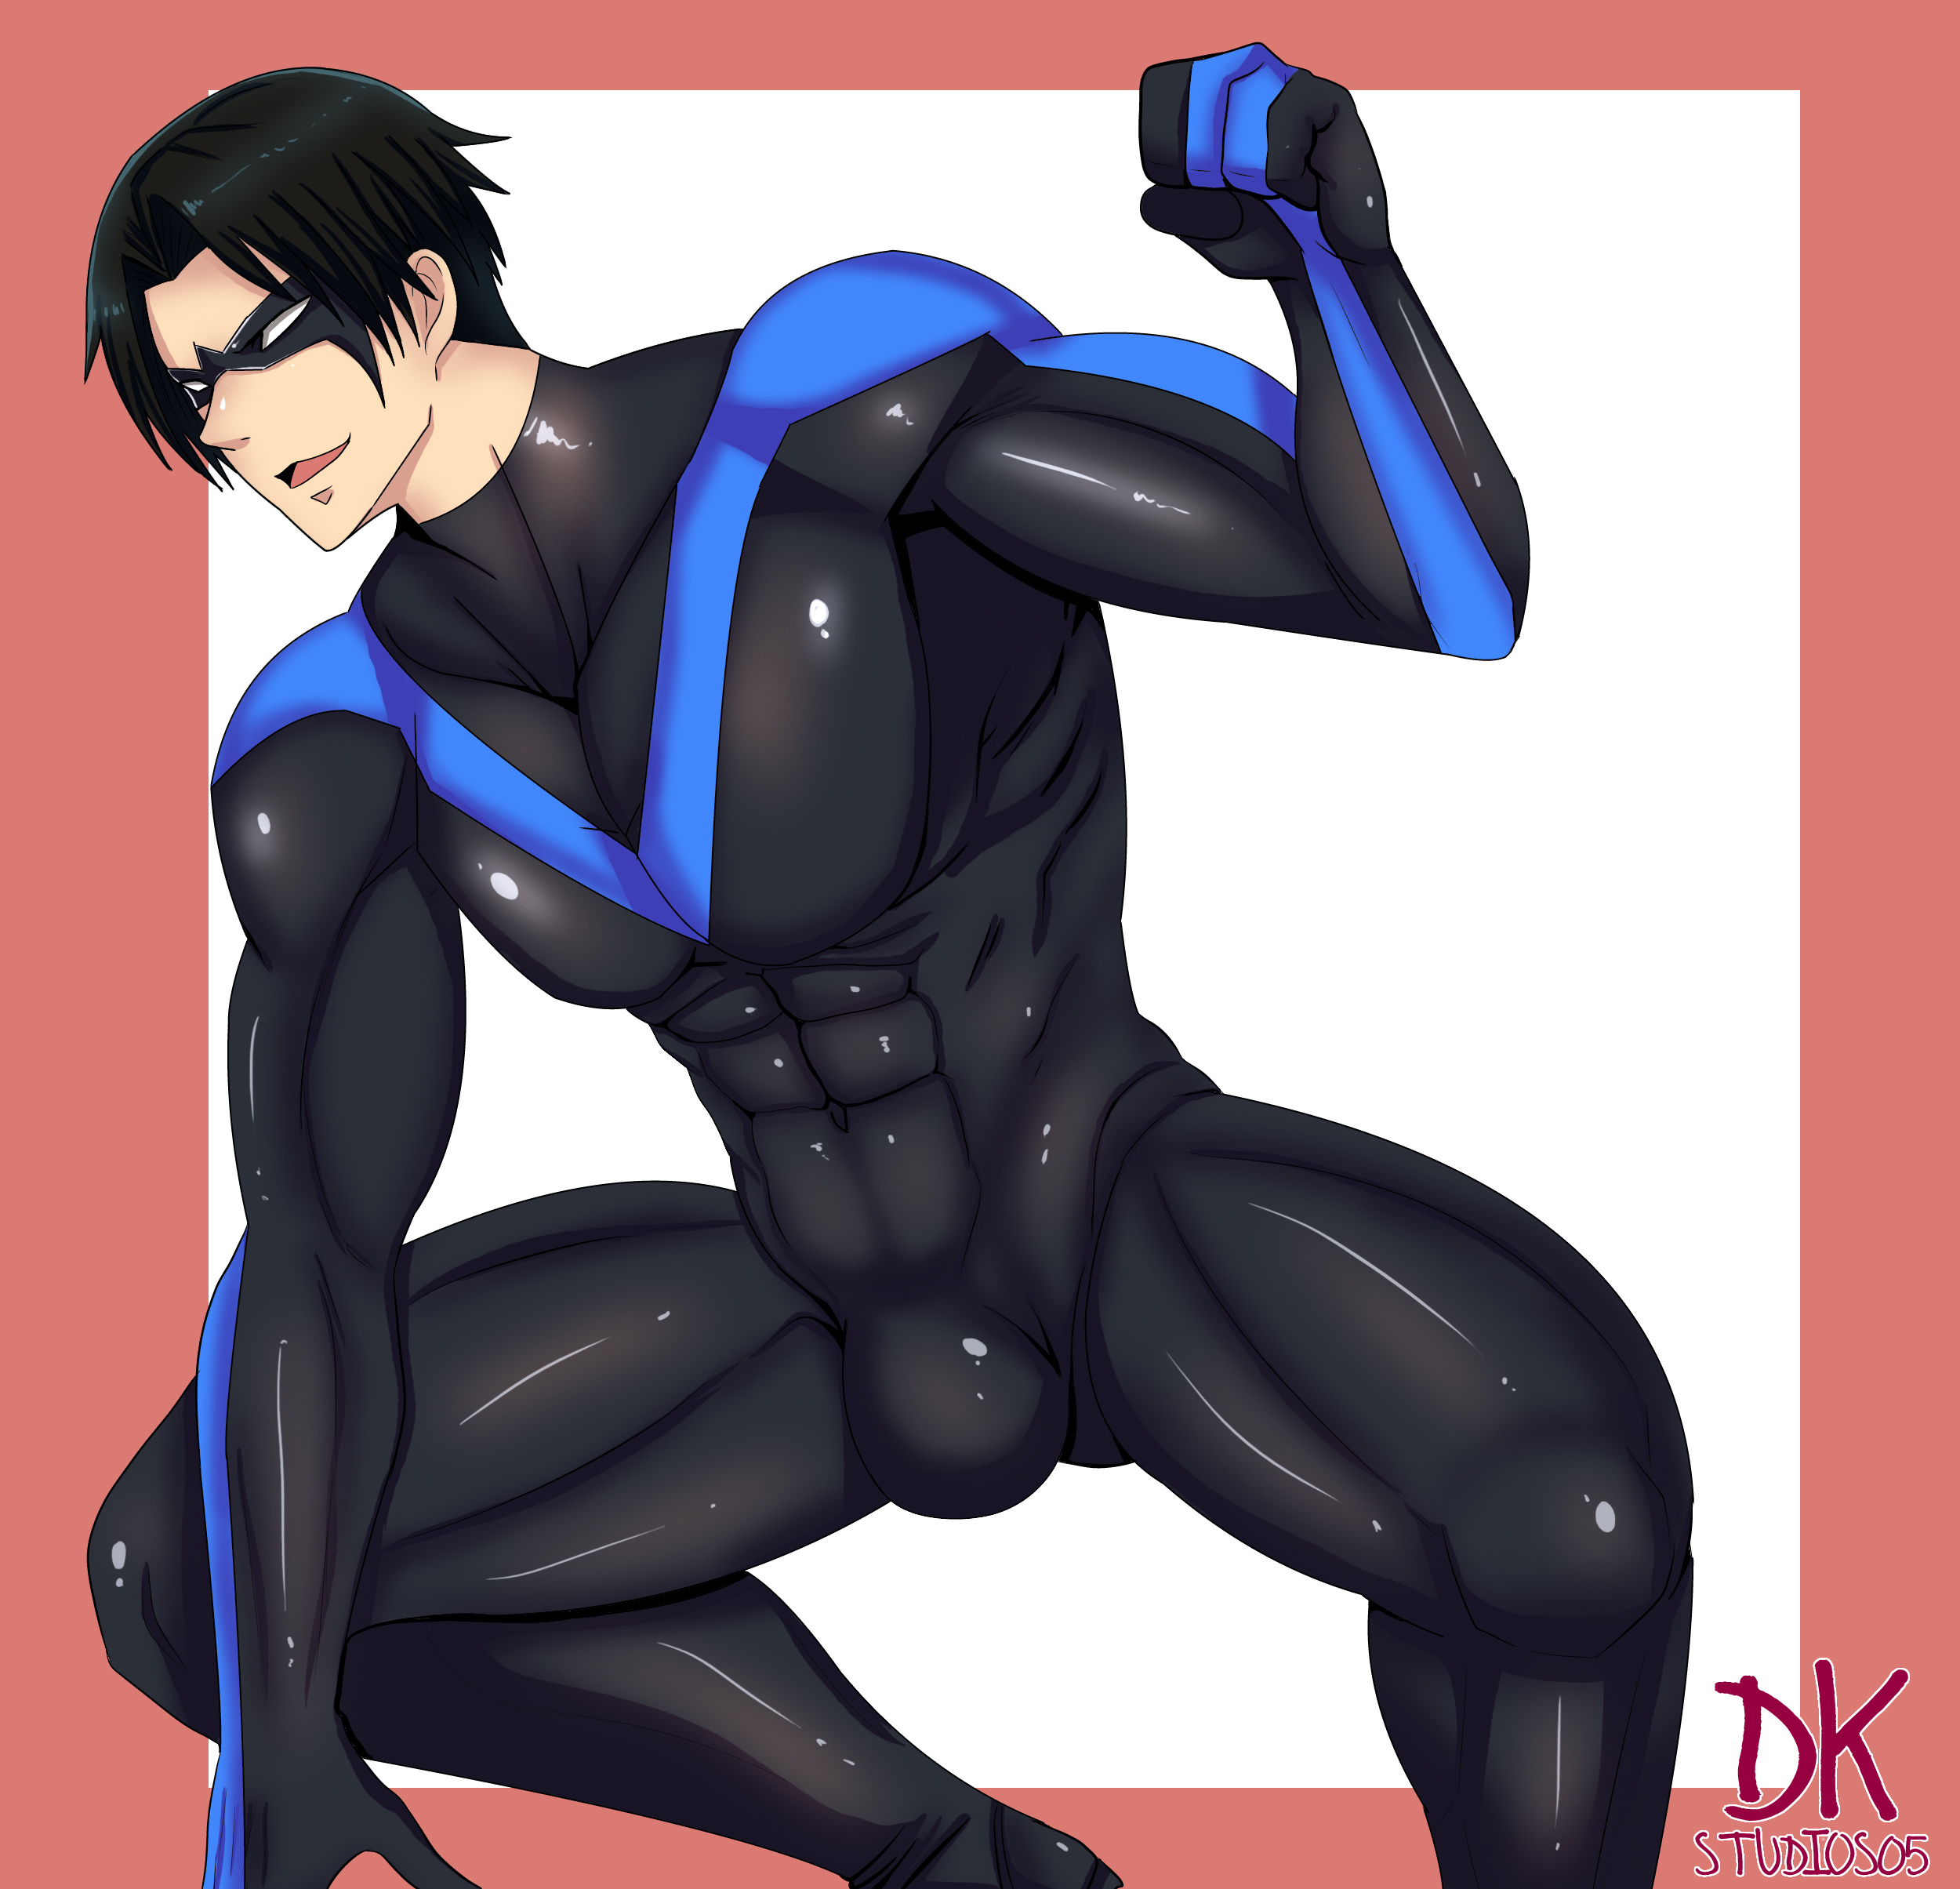 Dick picture nightwing